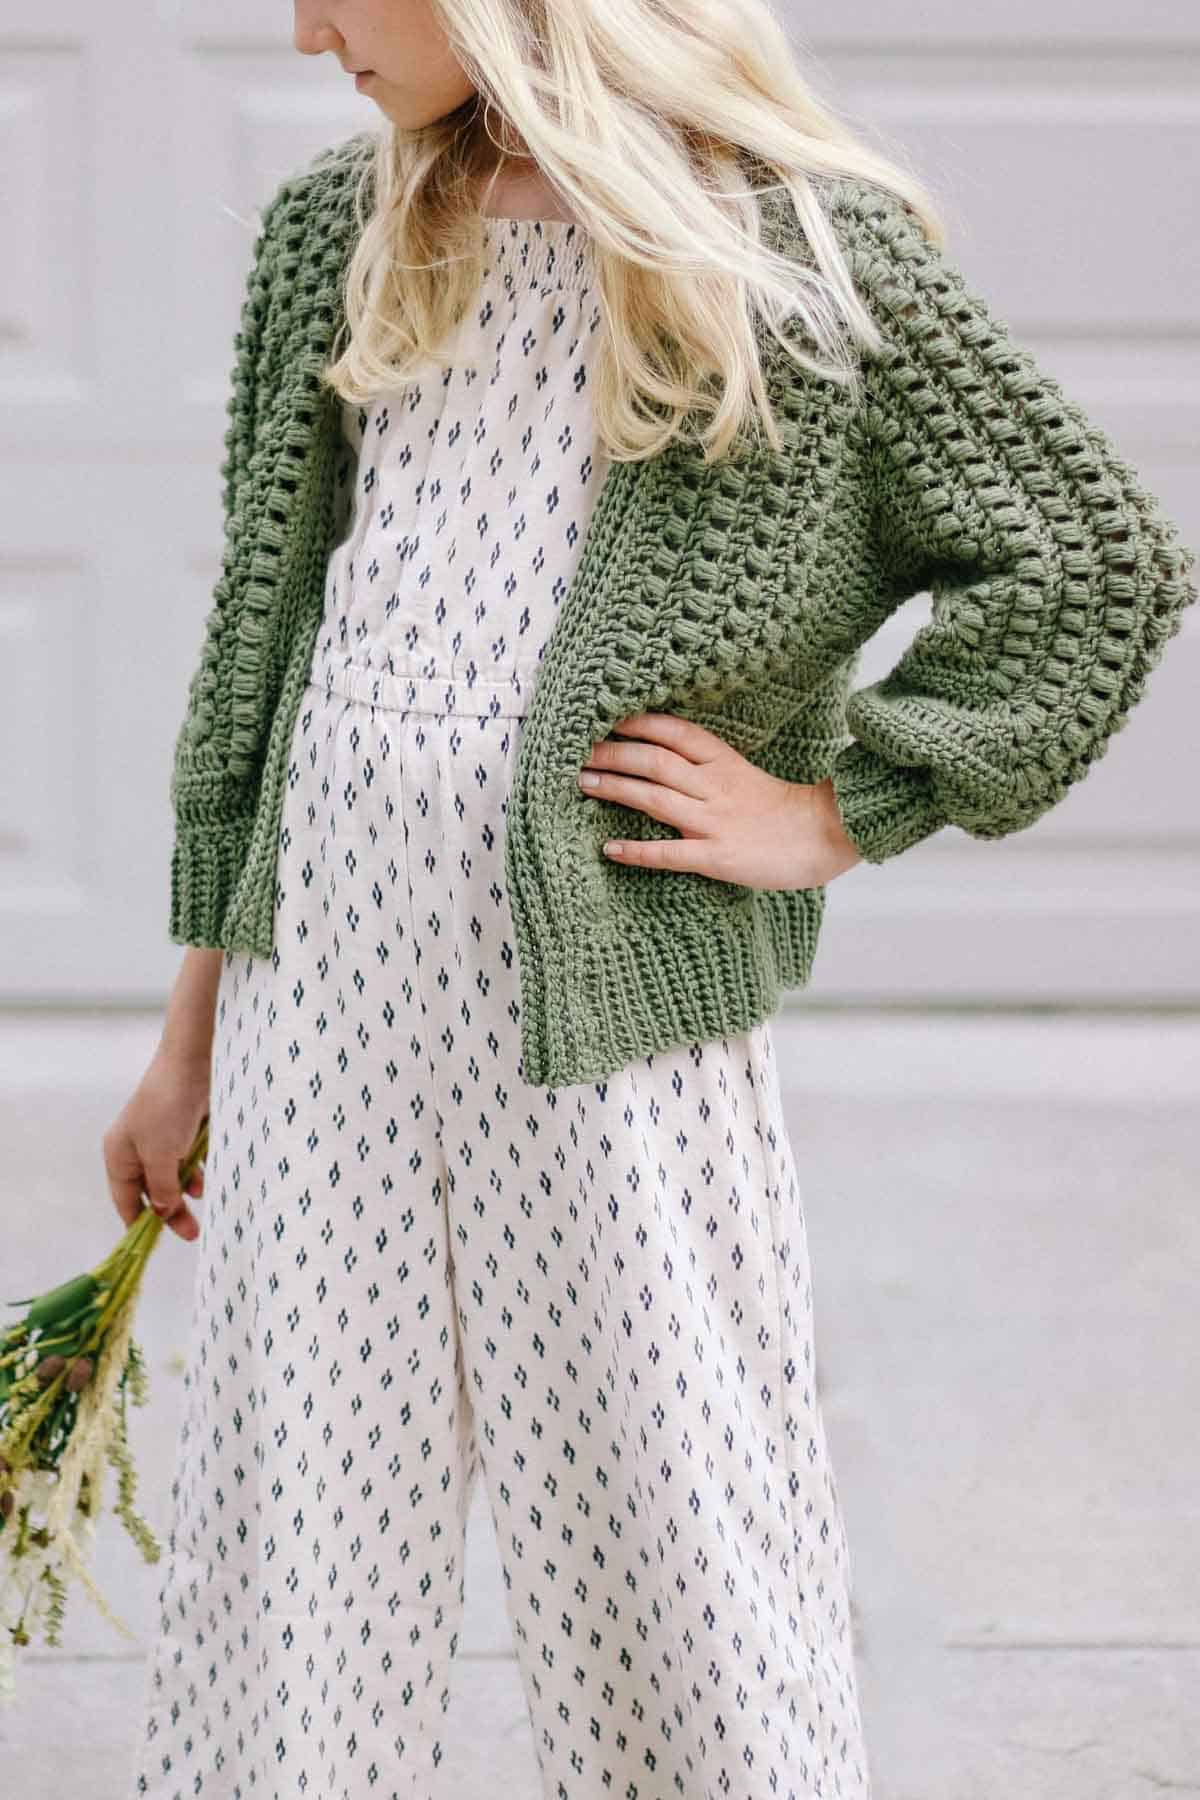 Blonde girl wearing an olive green crochet cardigan and holding a bouquet of flowers.